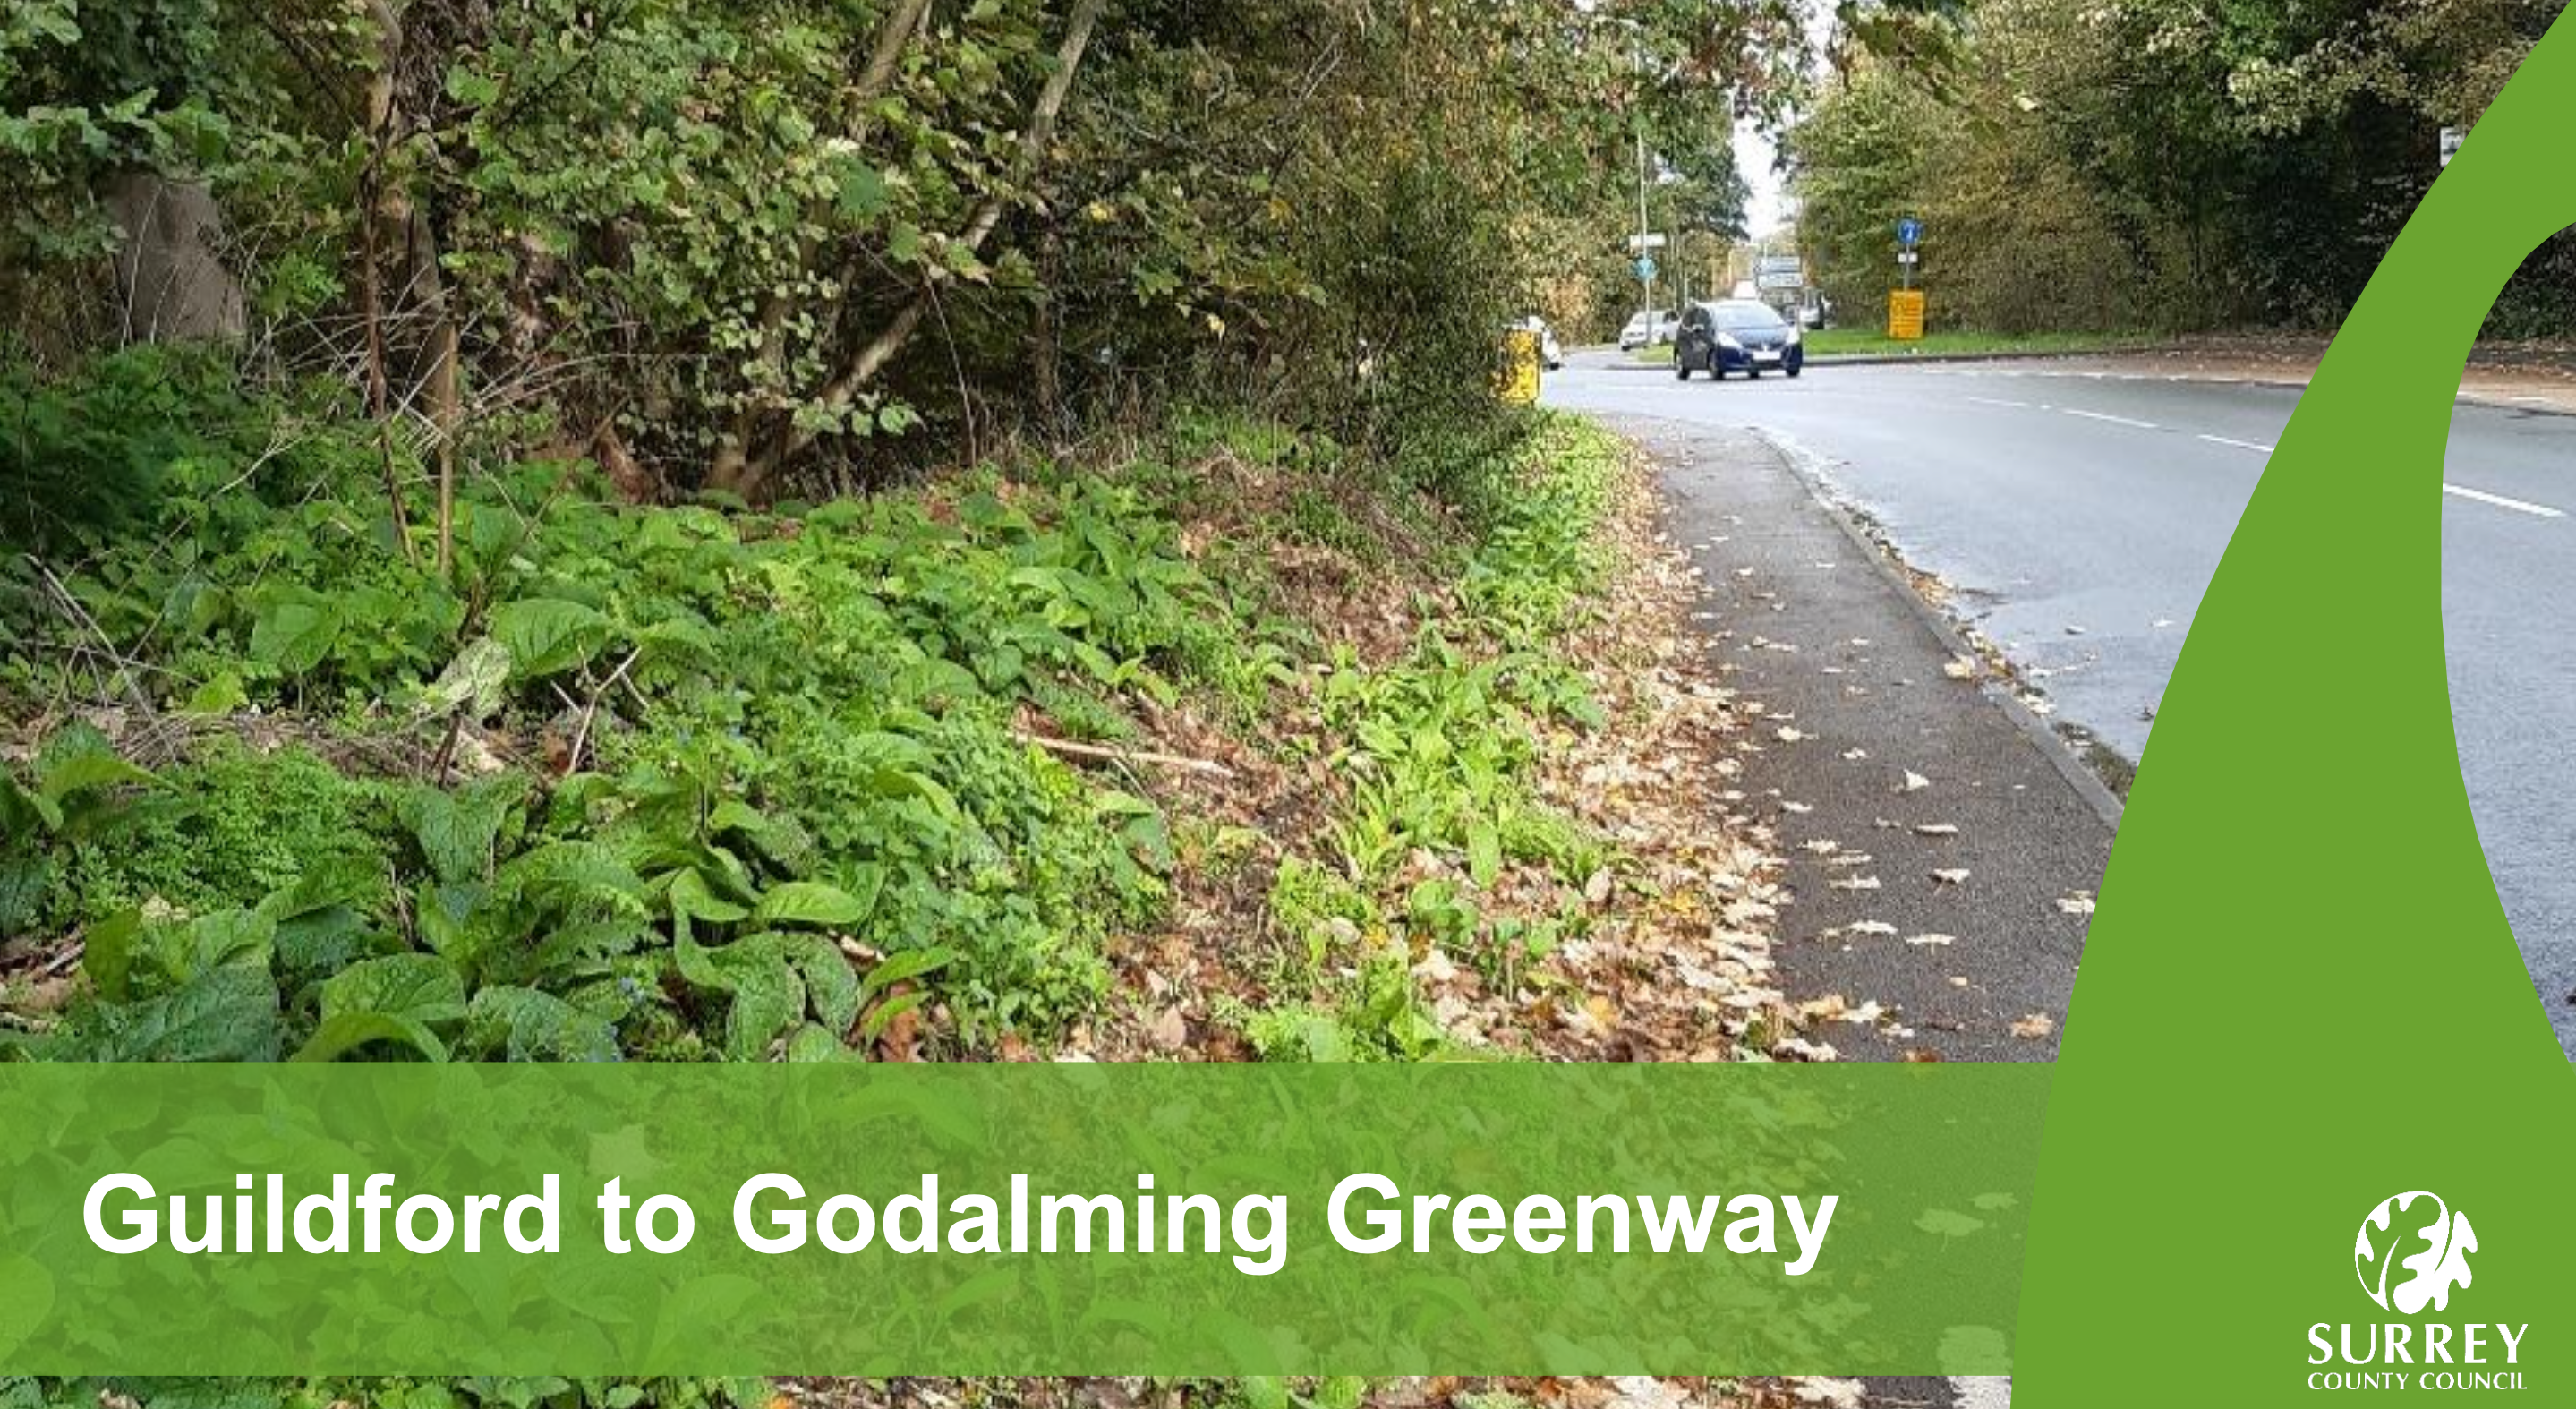 National Highways Phase 1 Funding secured for Guildford Godalming Greenway